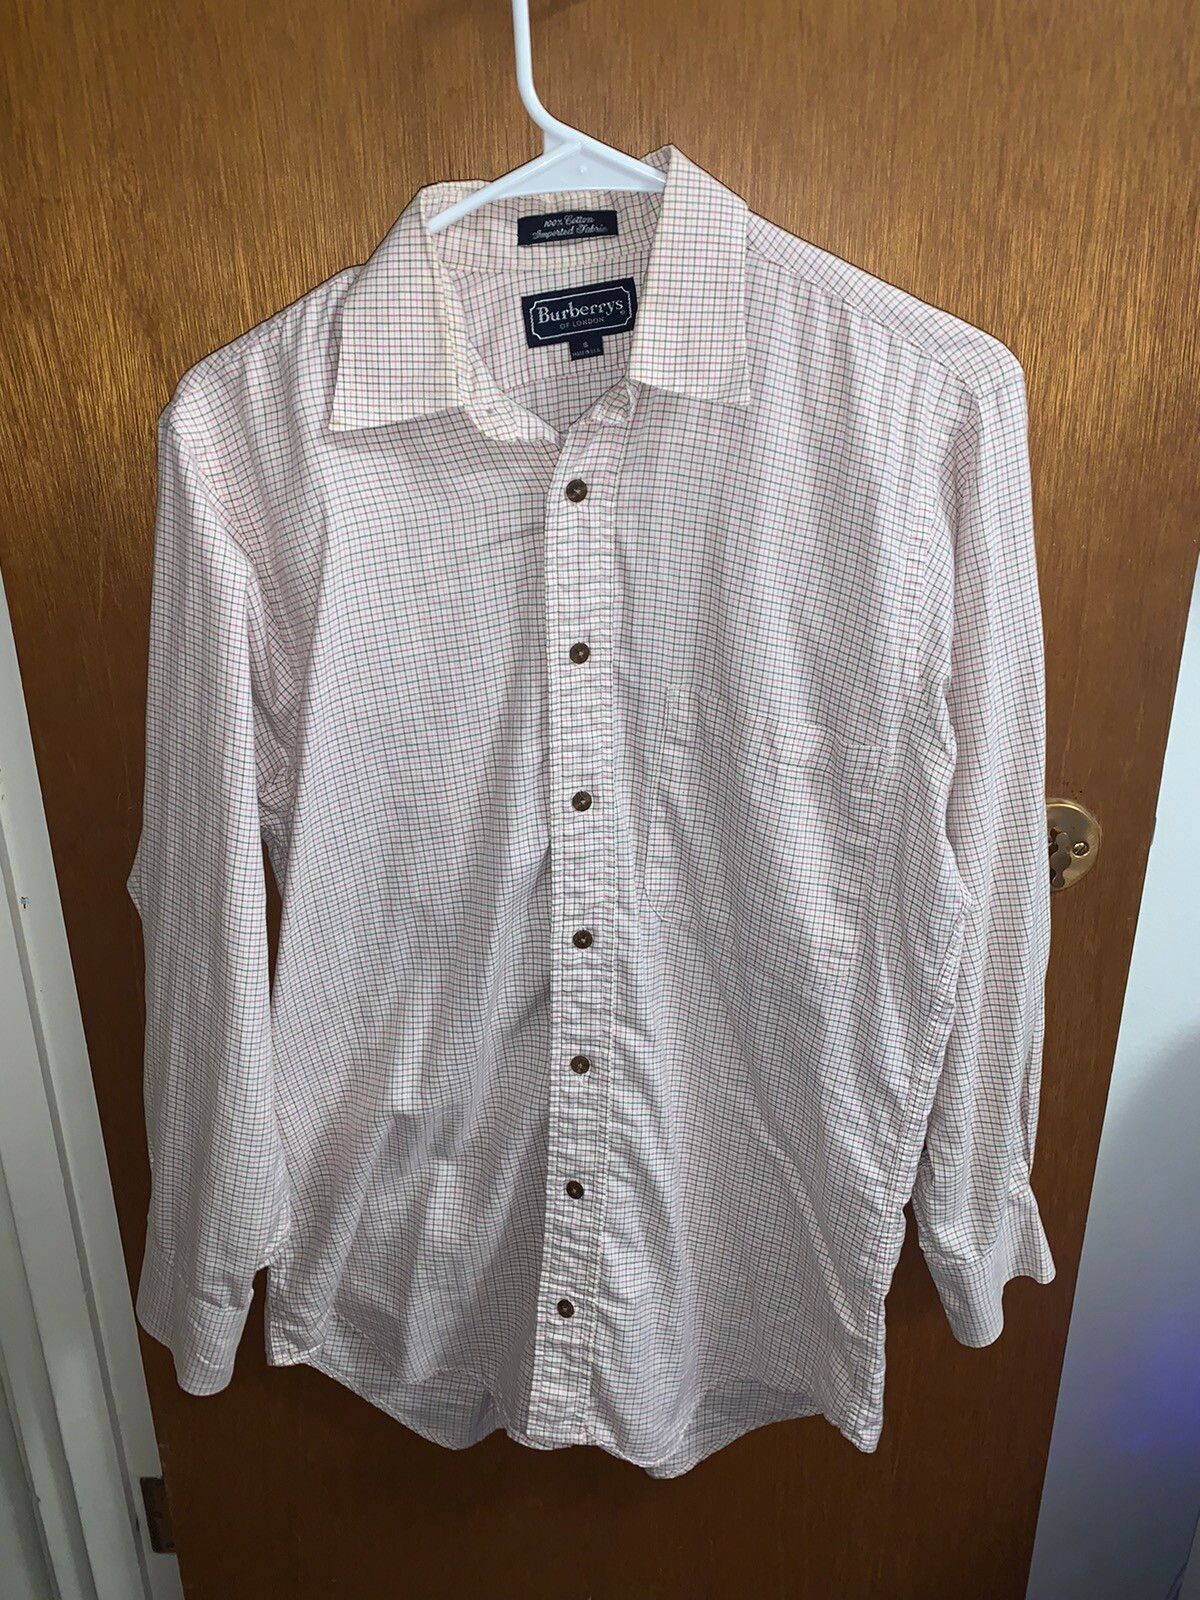 Burberry Burberry long sleeve button up Size US S / EU 44-46 / 1 - 1 Preview